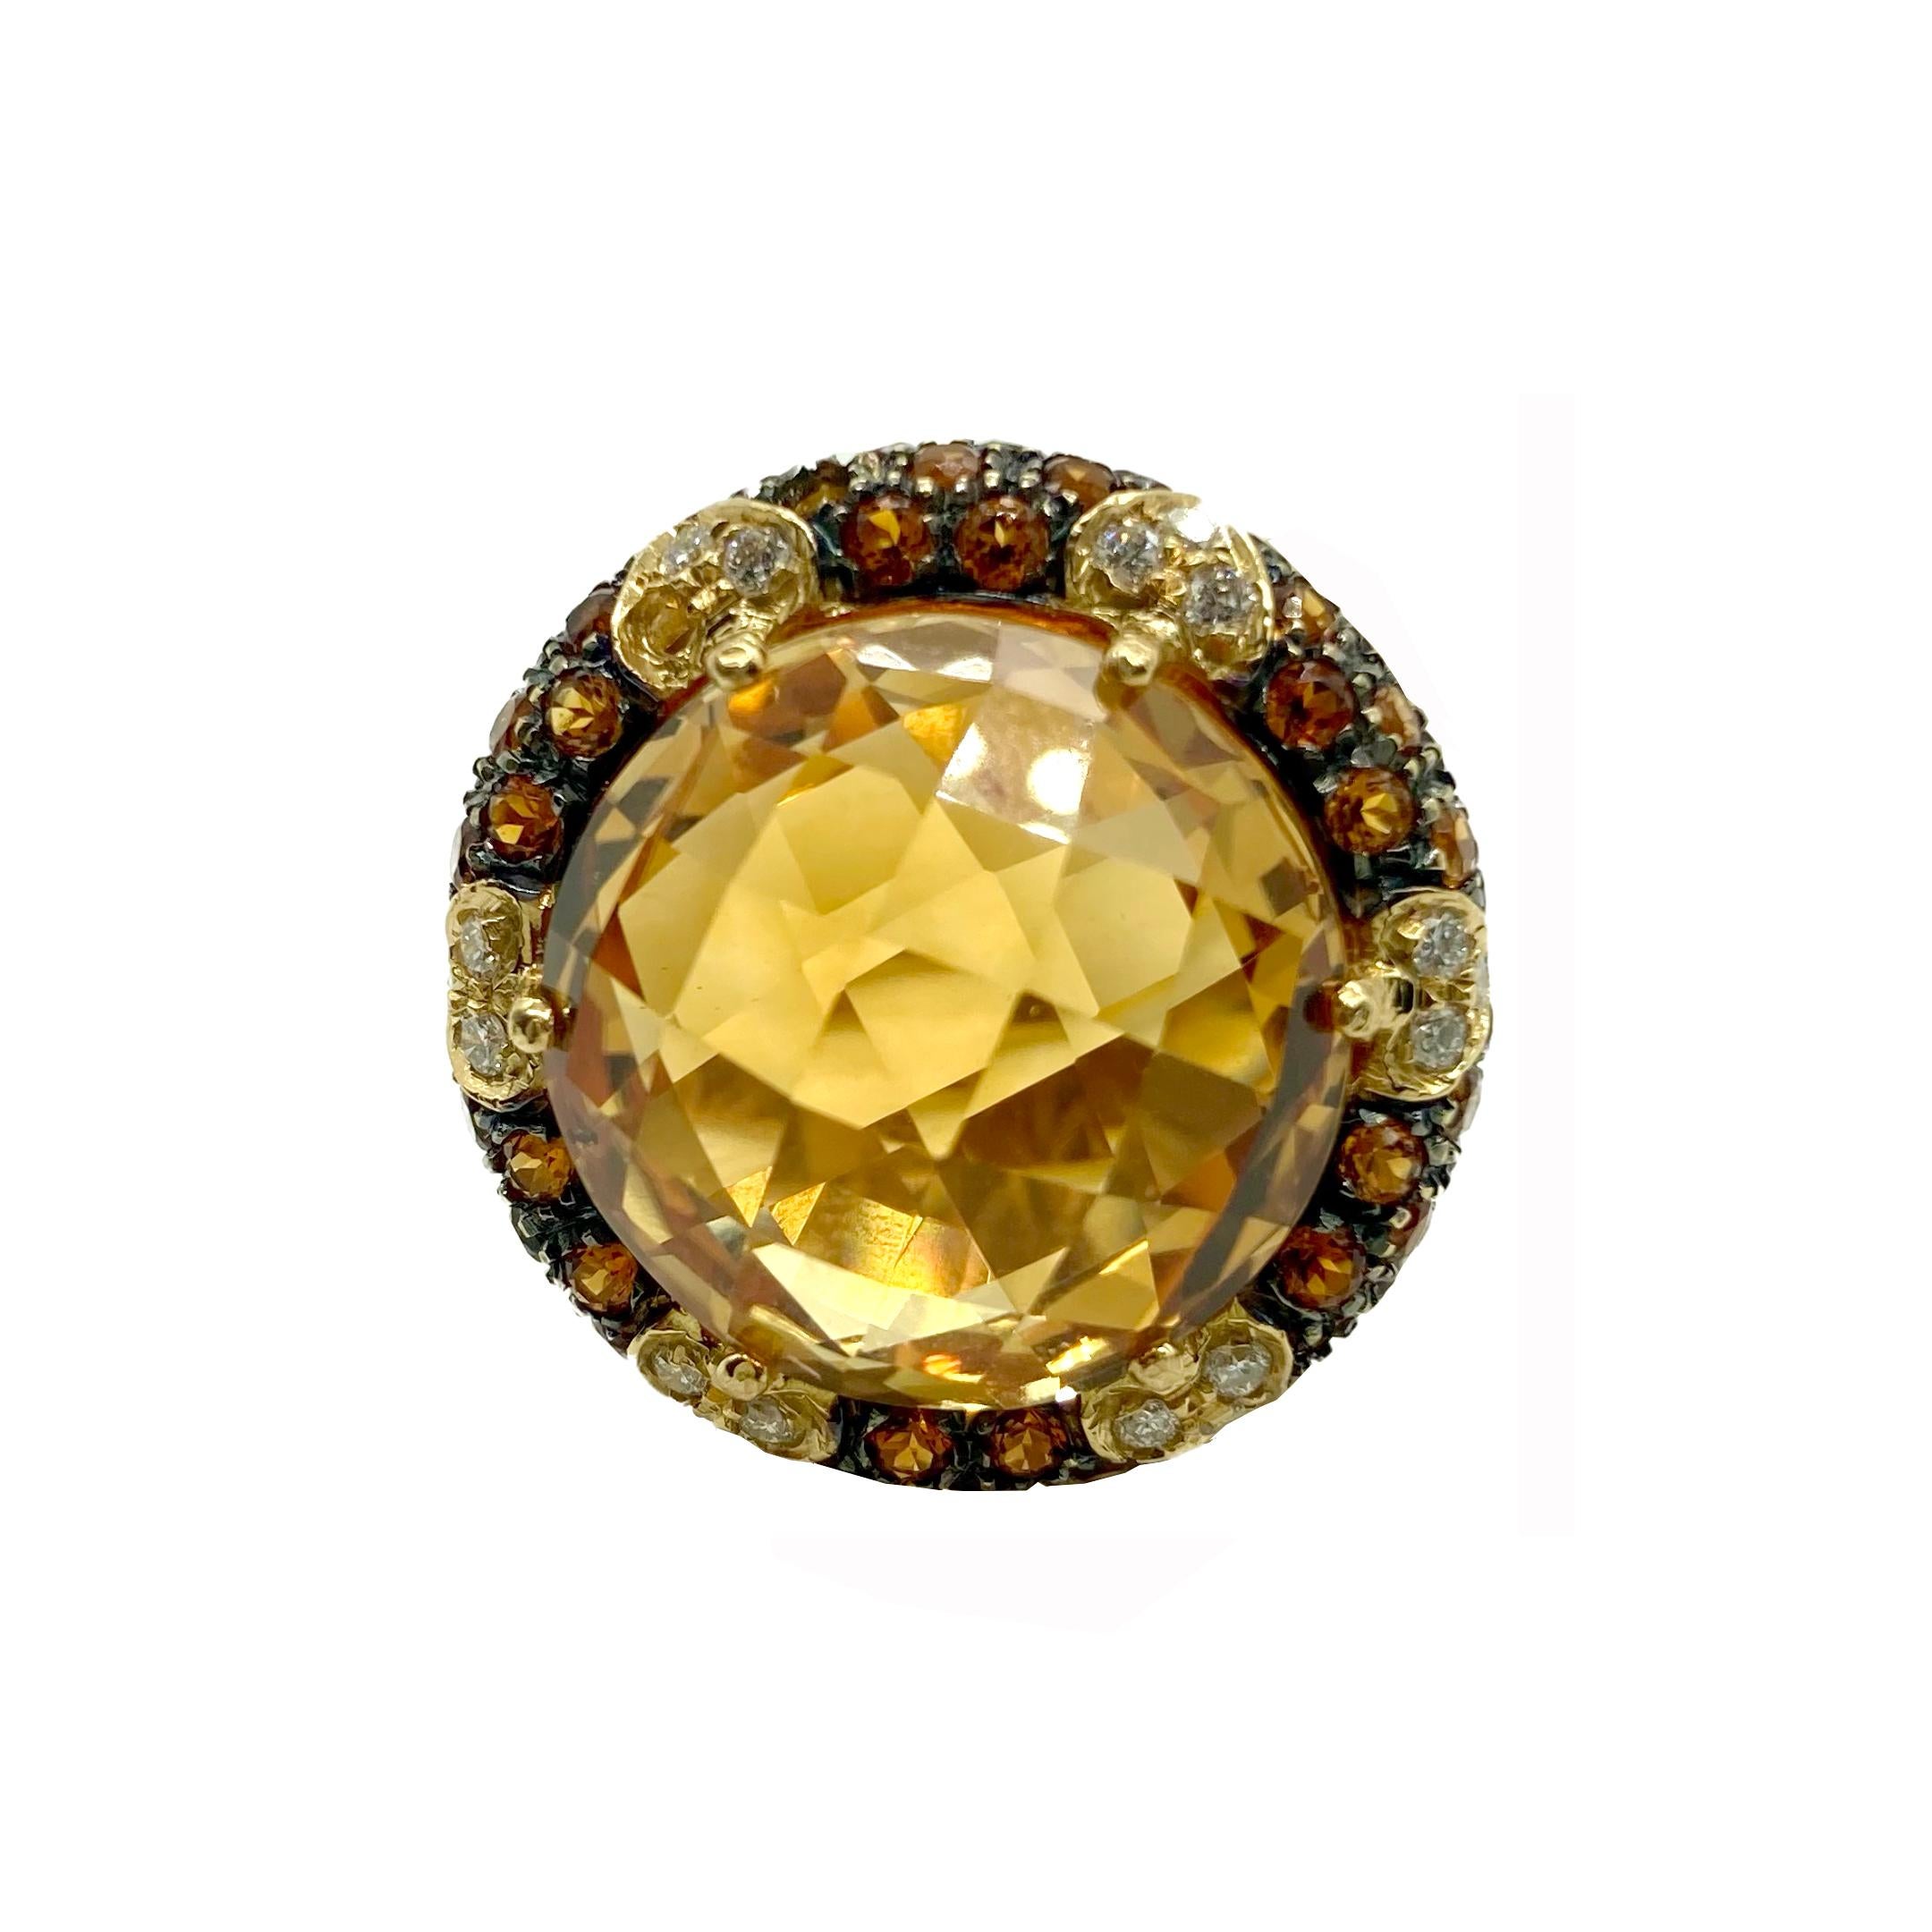 A beautiful 18 karat yellow gold cocktail ring centering a 22 carat modern rose cut citrine, accented by 56 round cut citrines totaling 1.5 carats and 18 round brilliant diamonds totaling approximately .40 carats.